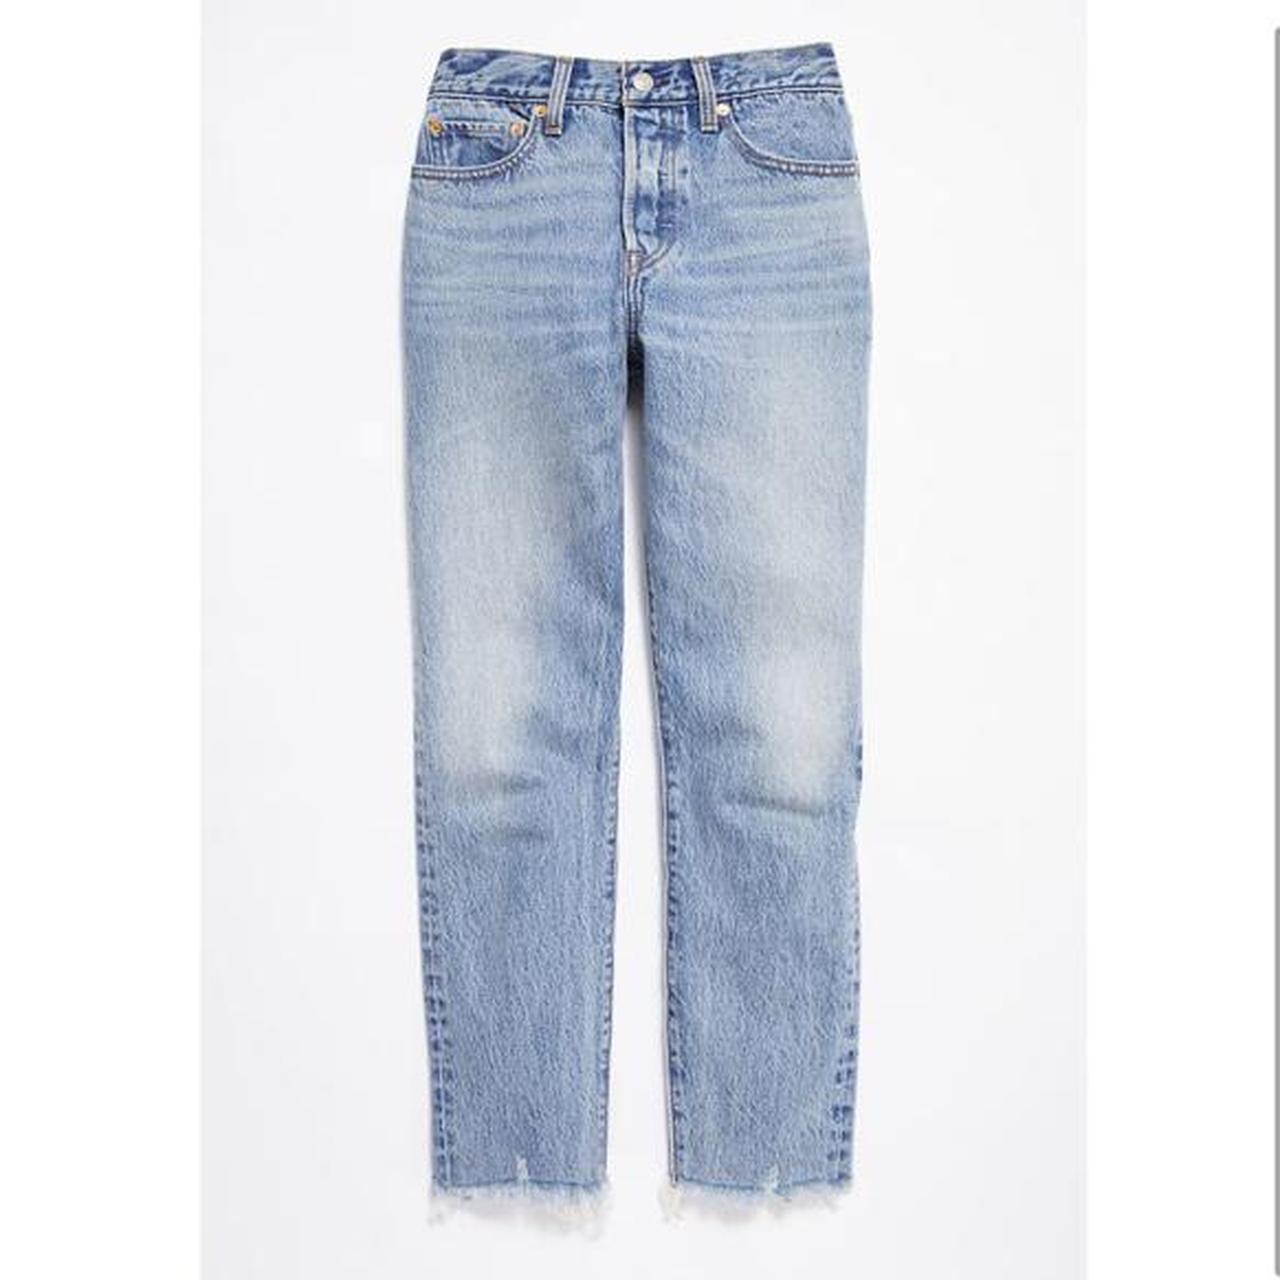 LEVI'S Wedgie Icon High-Rise Jeans - color “Shut Up”... - Depop